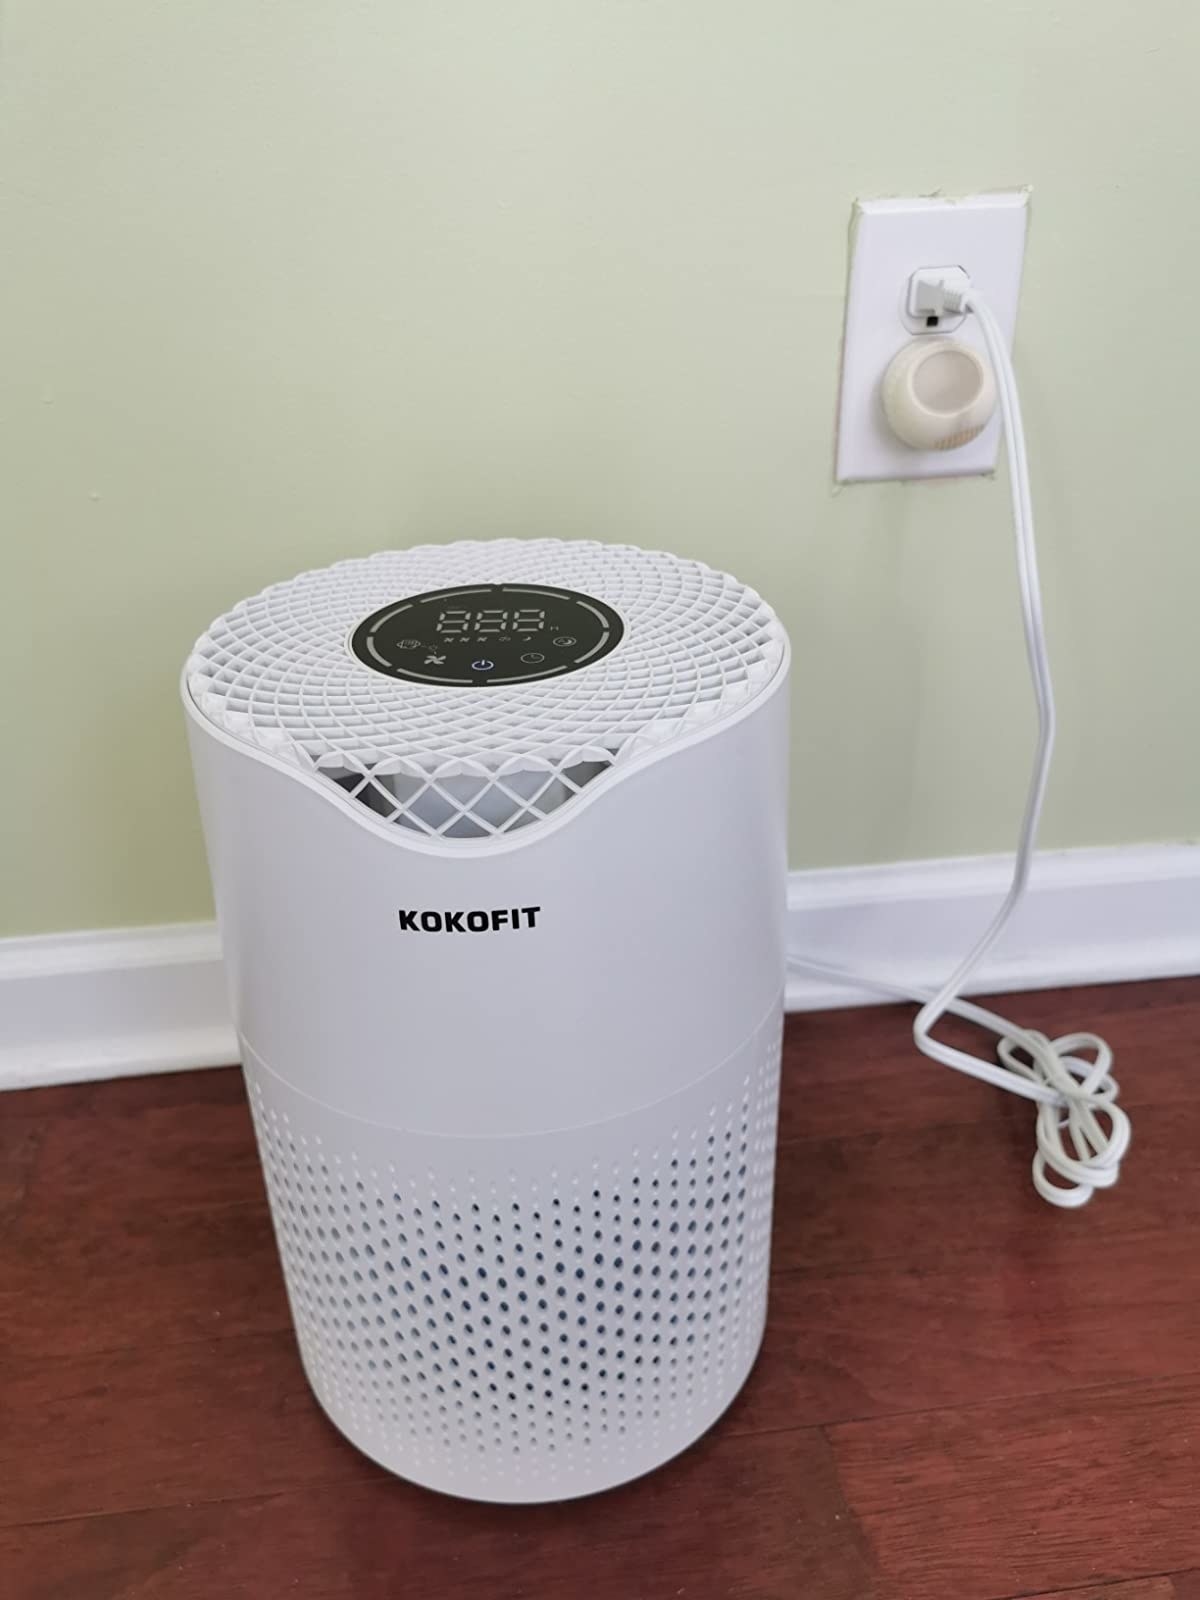 reviewer image of the air purifier plugged in